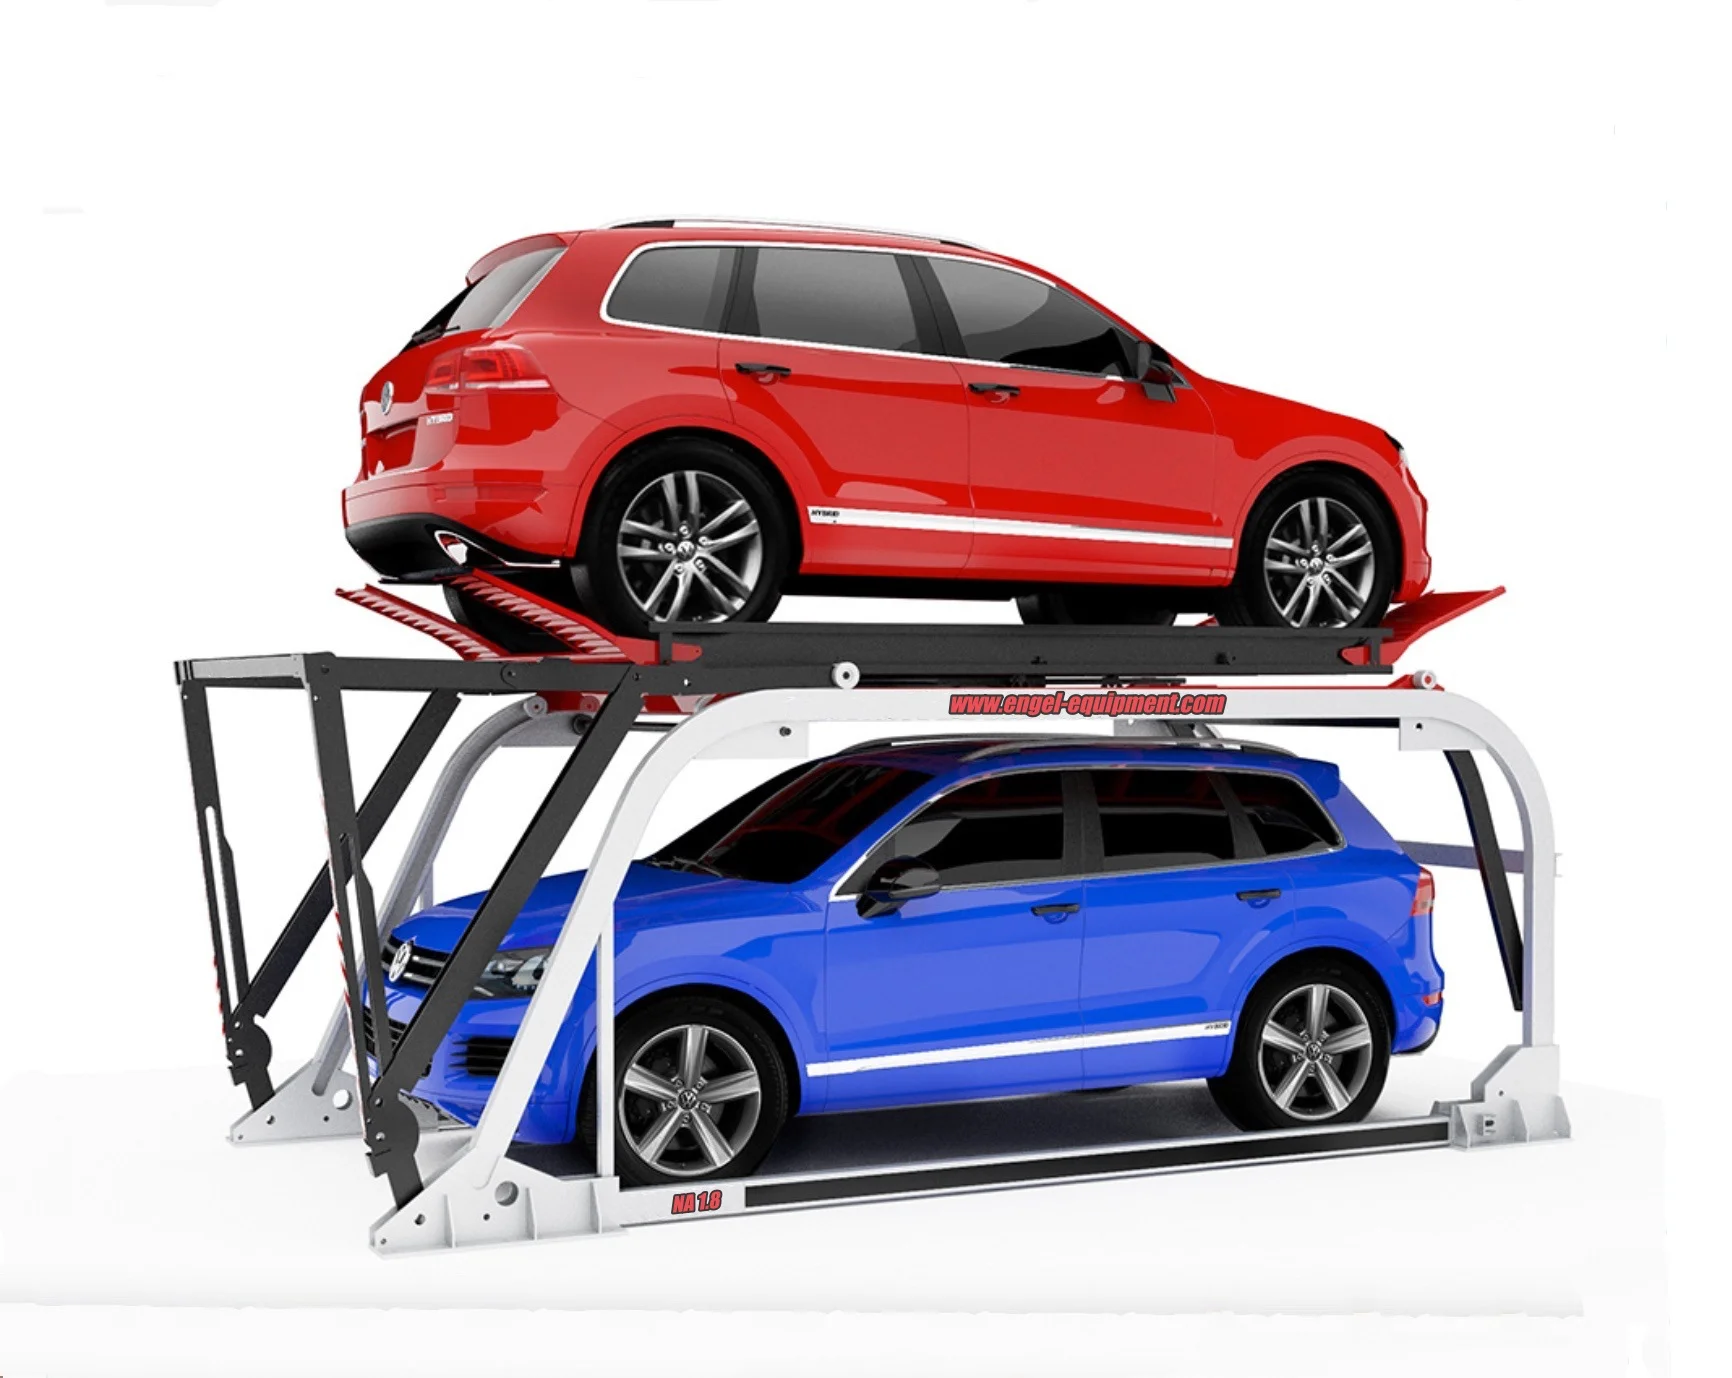 Car lift with red car on top and a blue car beneath.